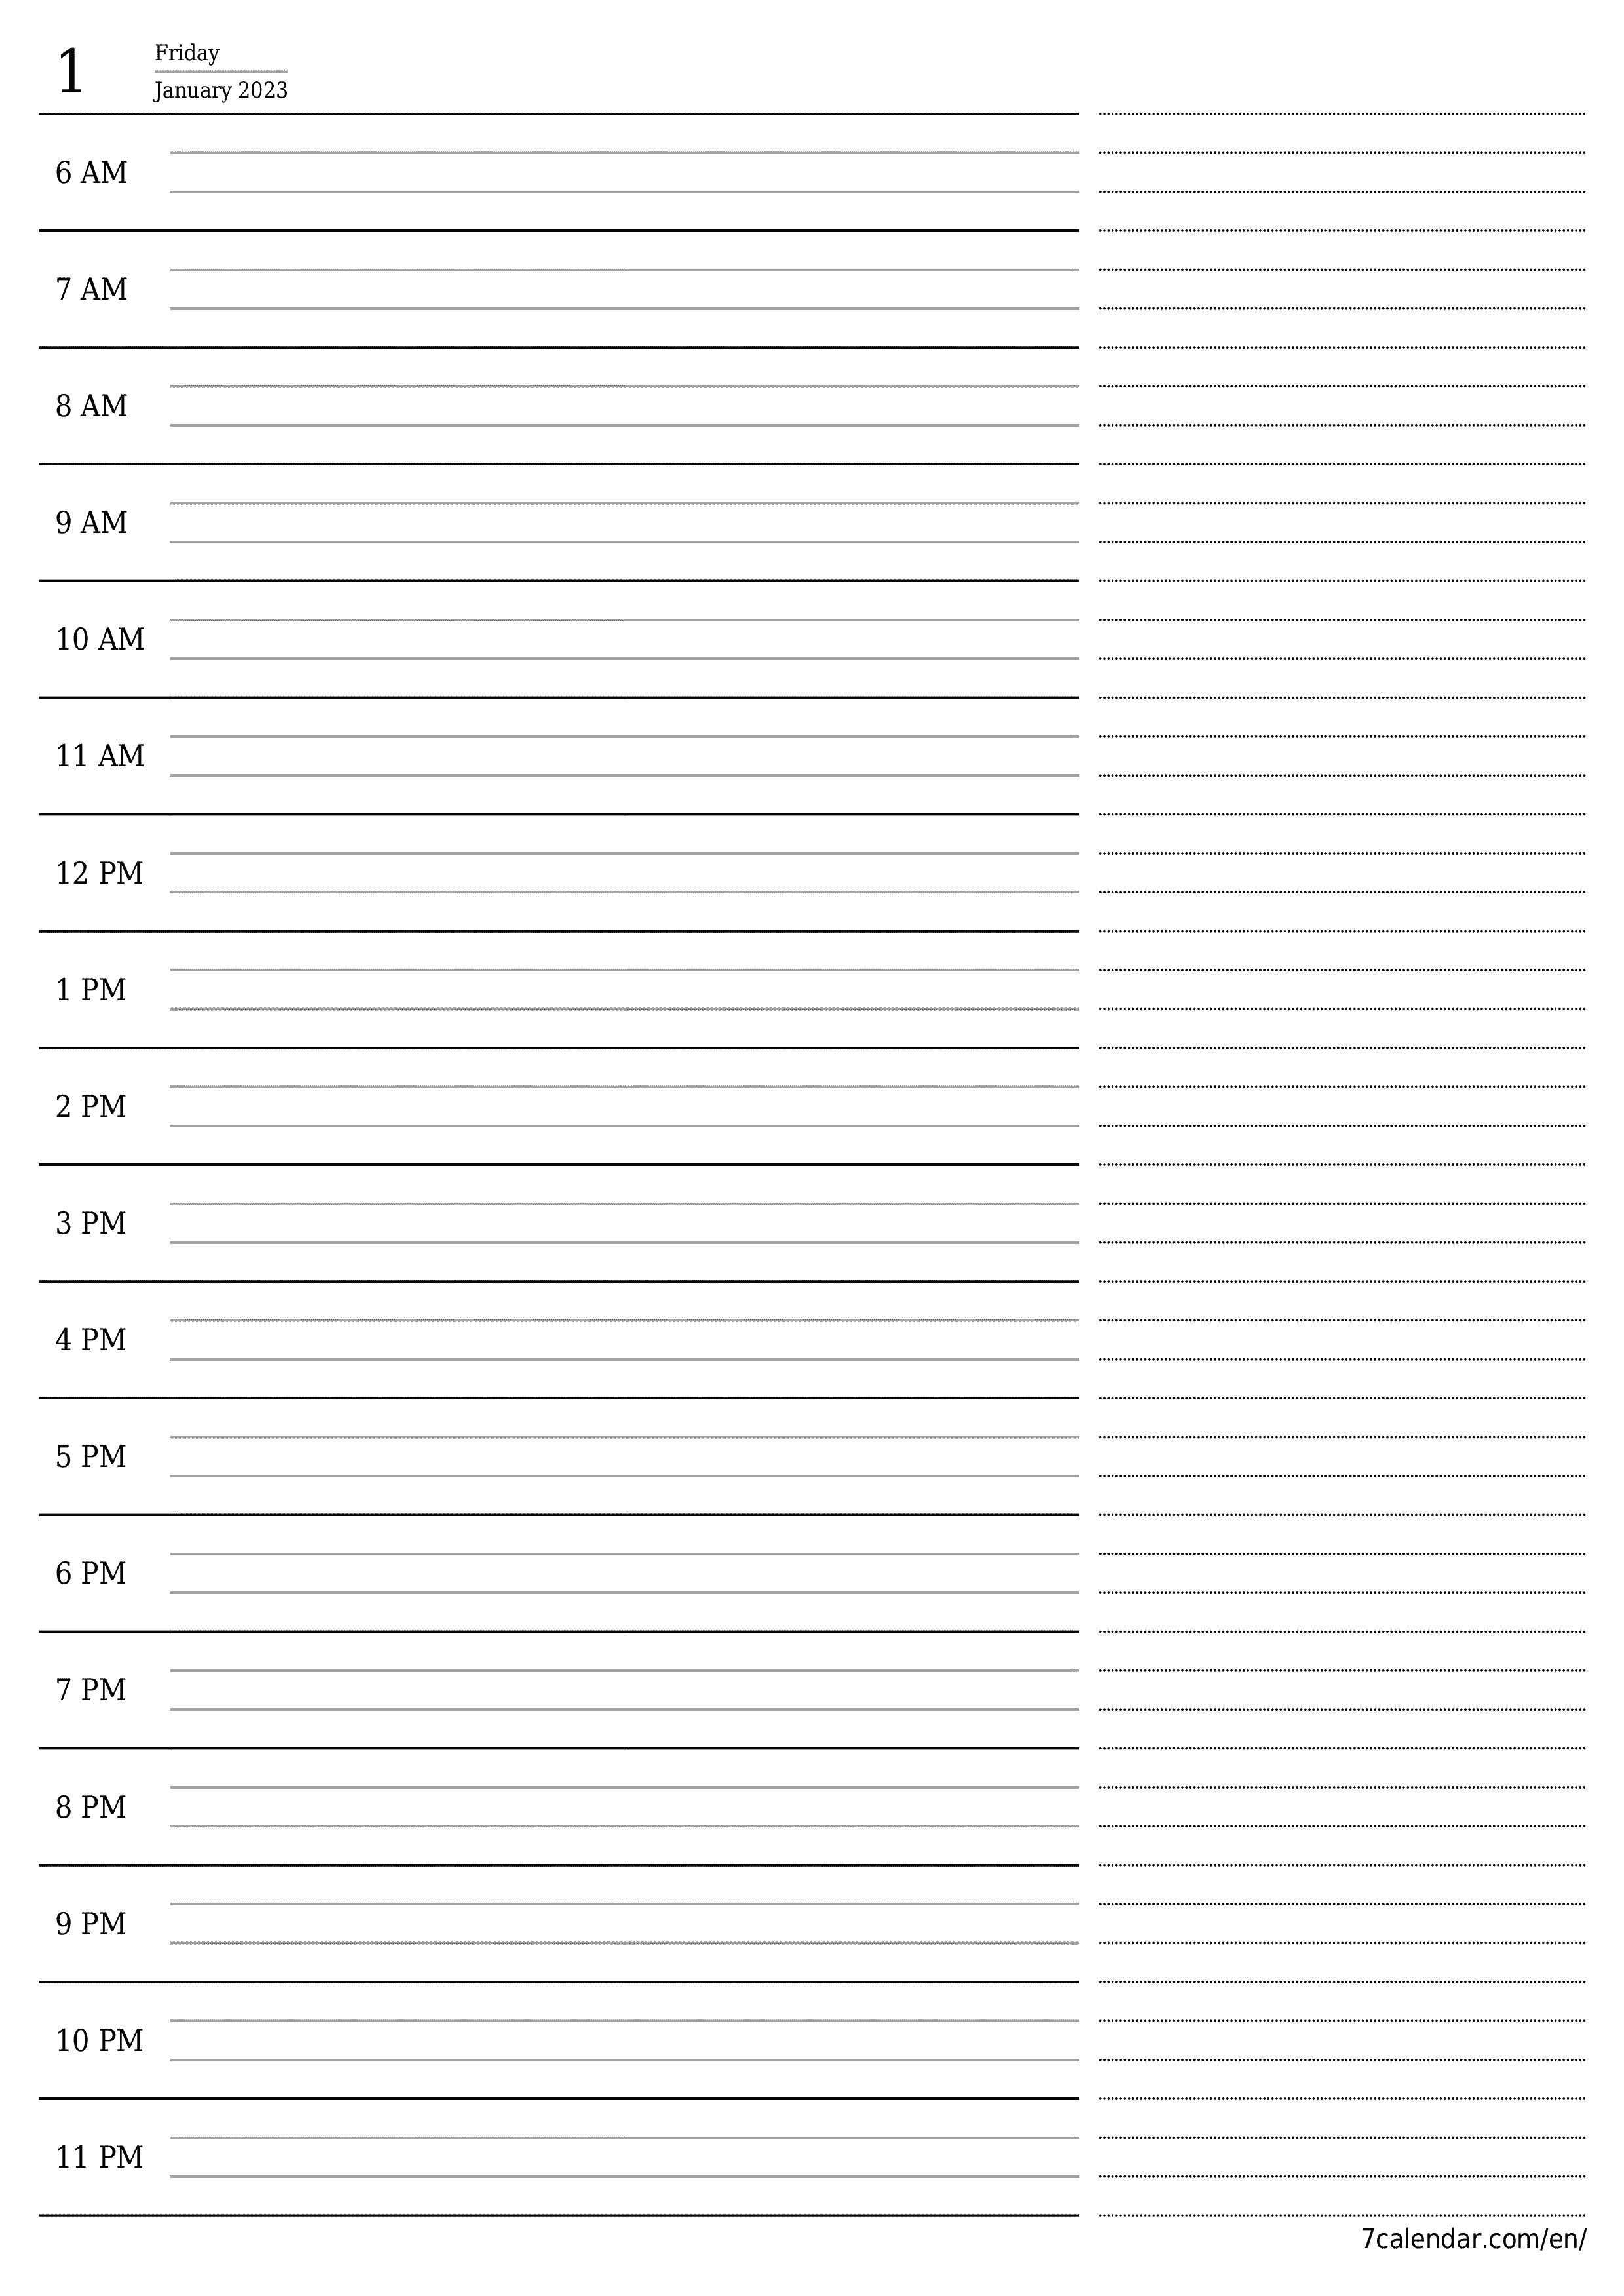 Blank daily calendar planner for day January 2023 with notes, save and print to PDF PNG English - 7calendar.com